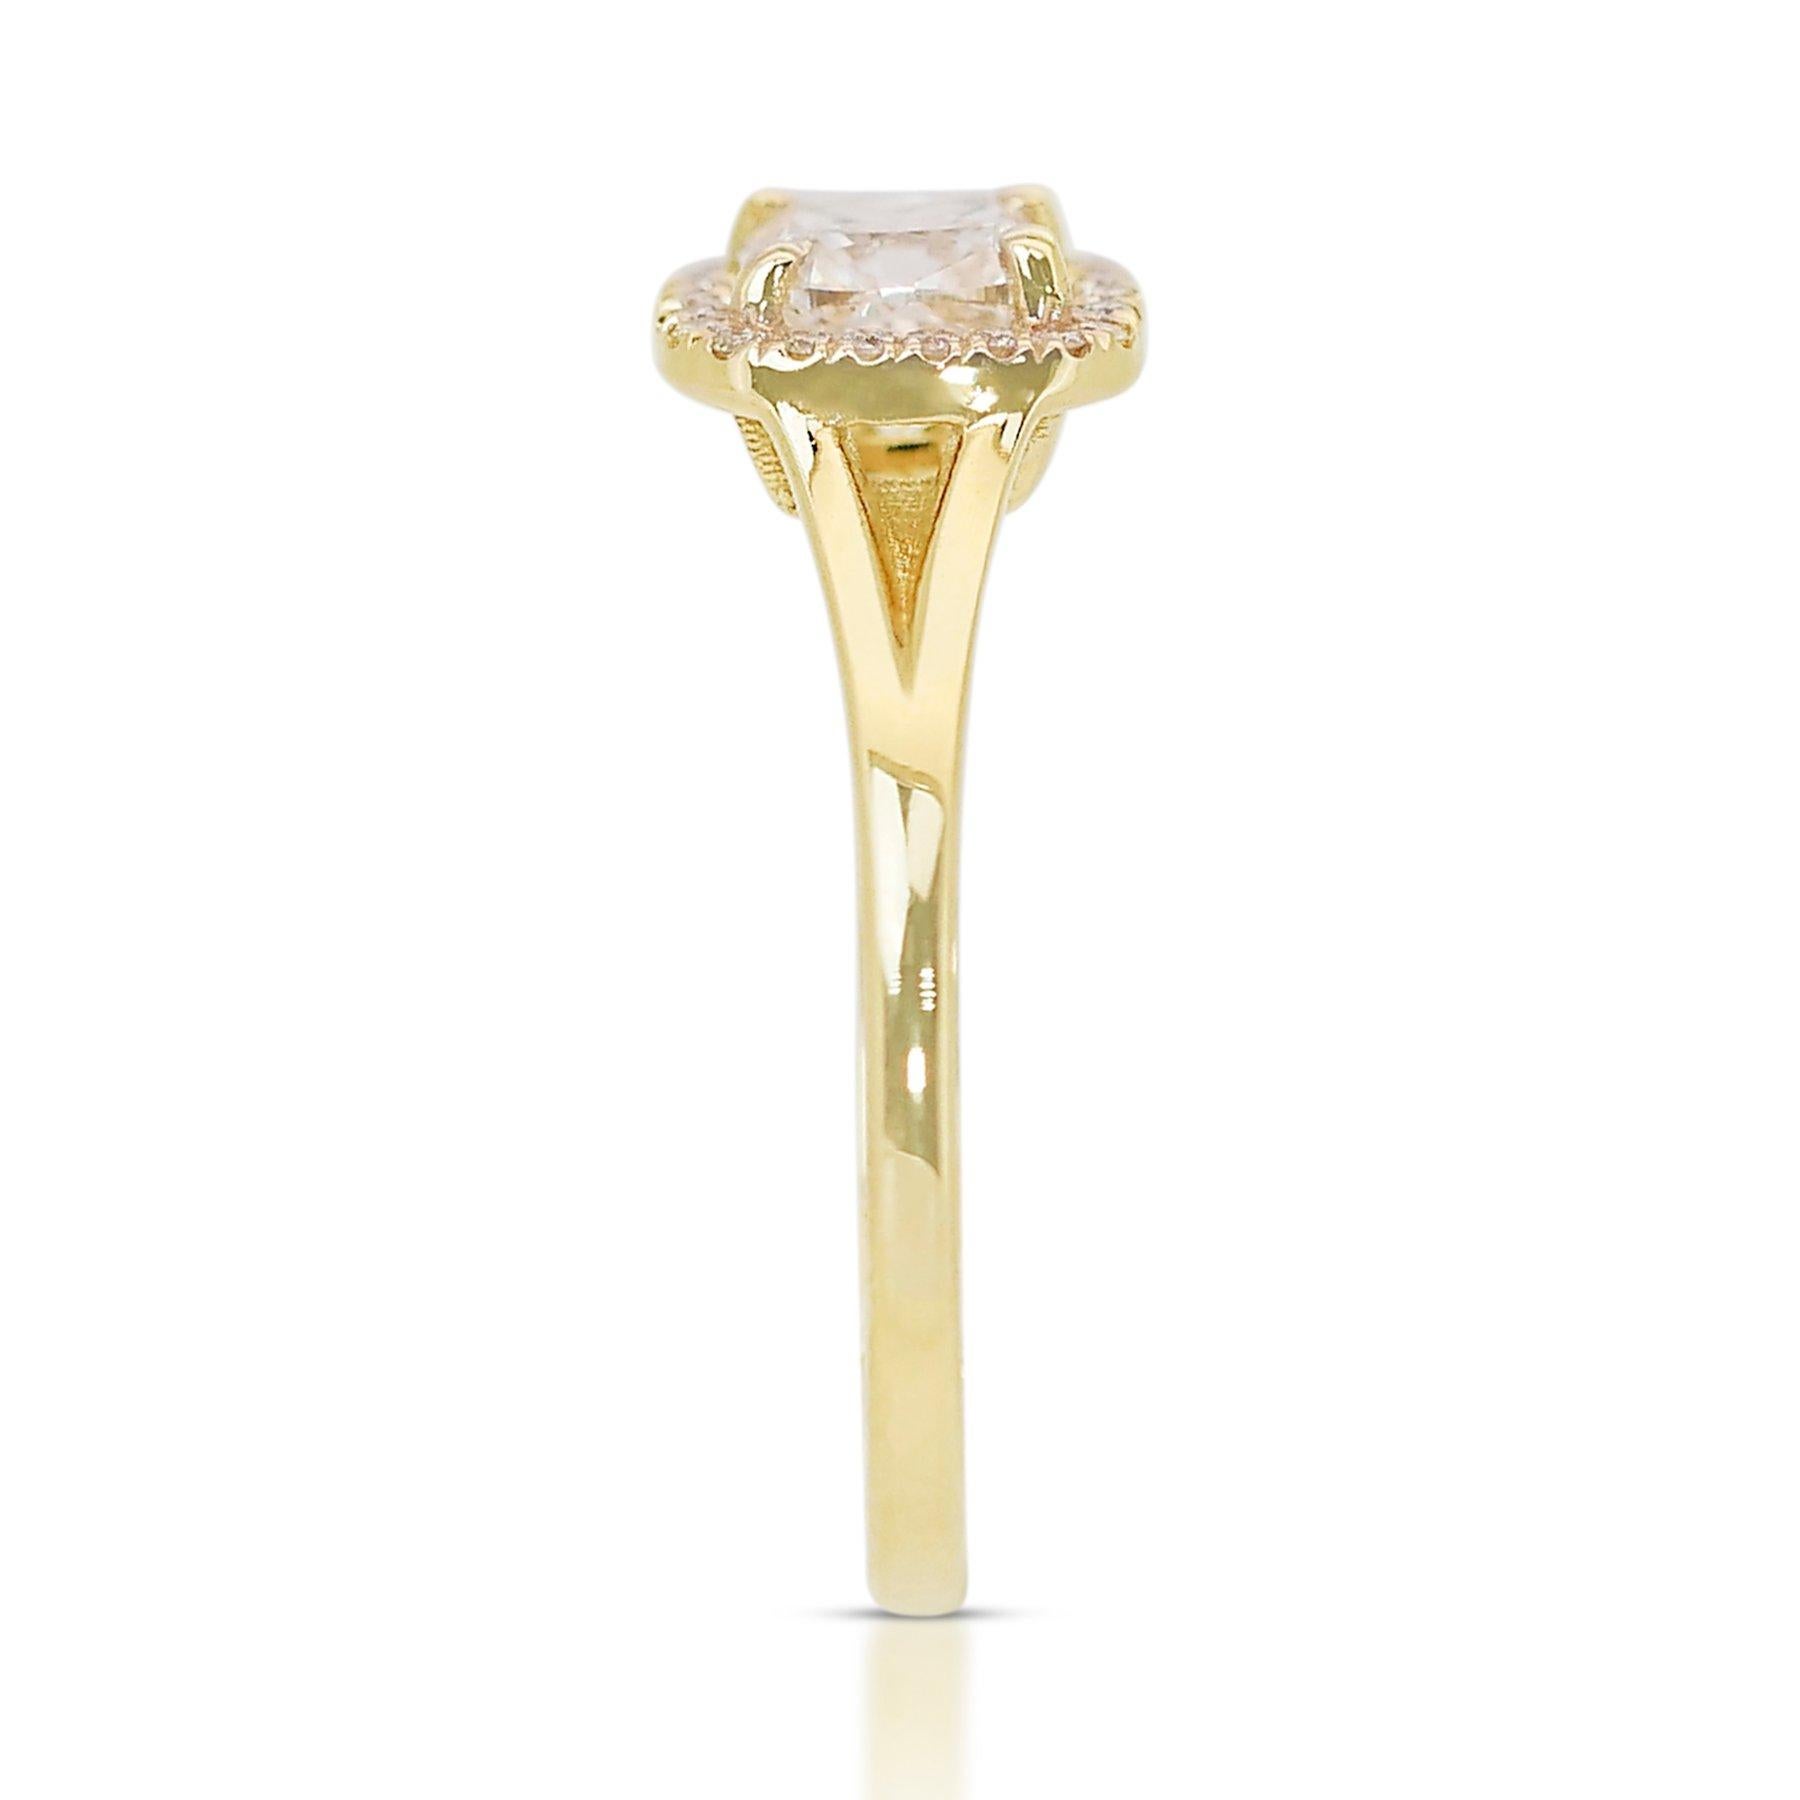 Sparkling 1.63ct Diamond Halo Ring in 18k Yellow Gold - GIA Certified For Sale 1